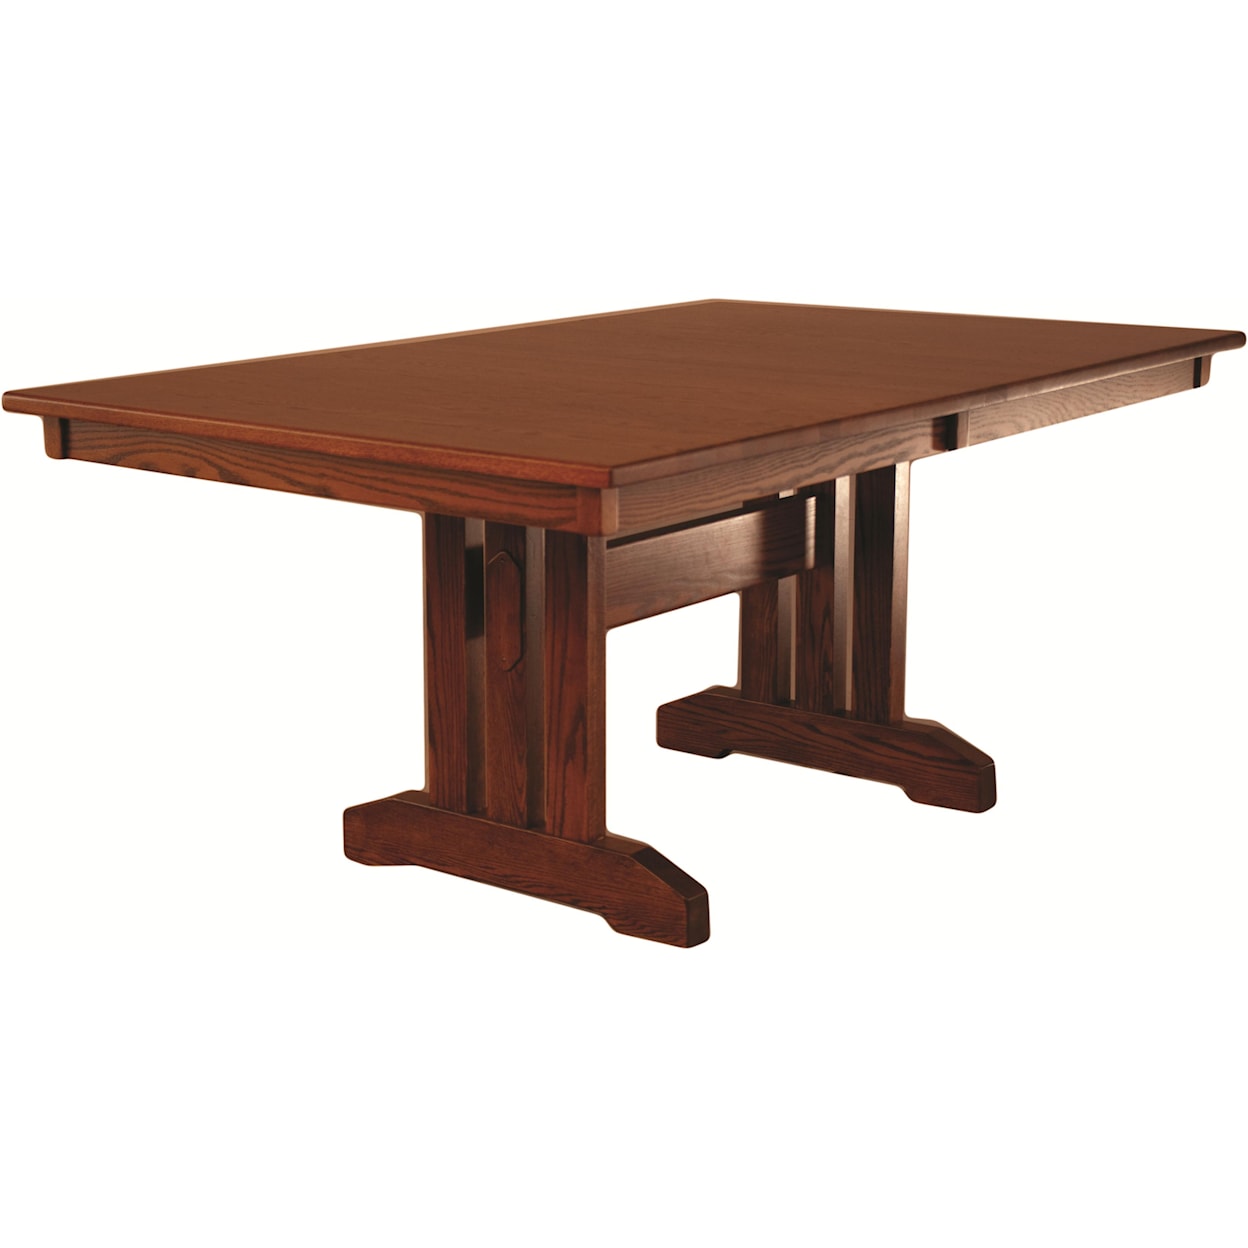 Oakwood Industries Casual Dining Mission Table